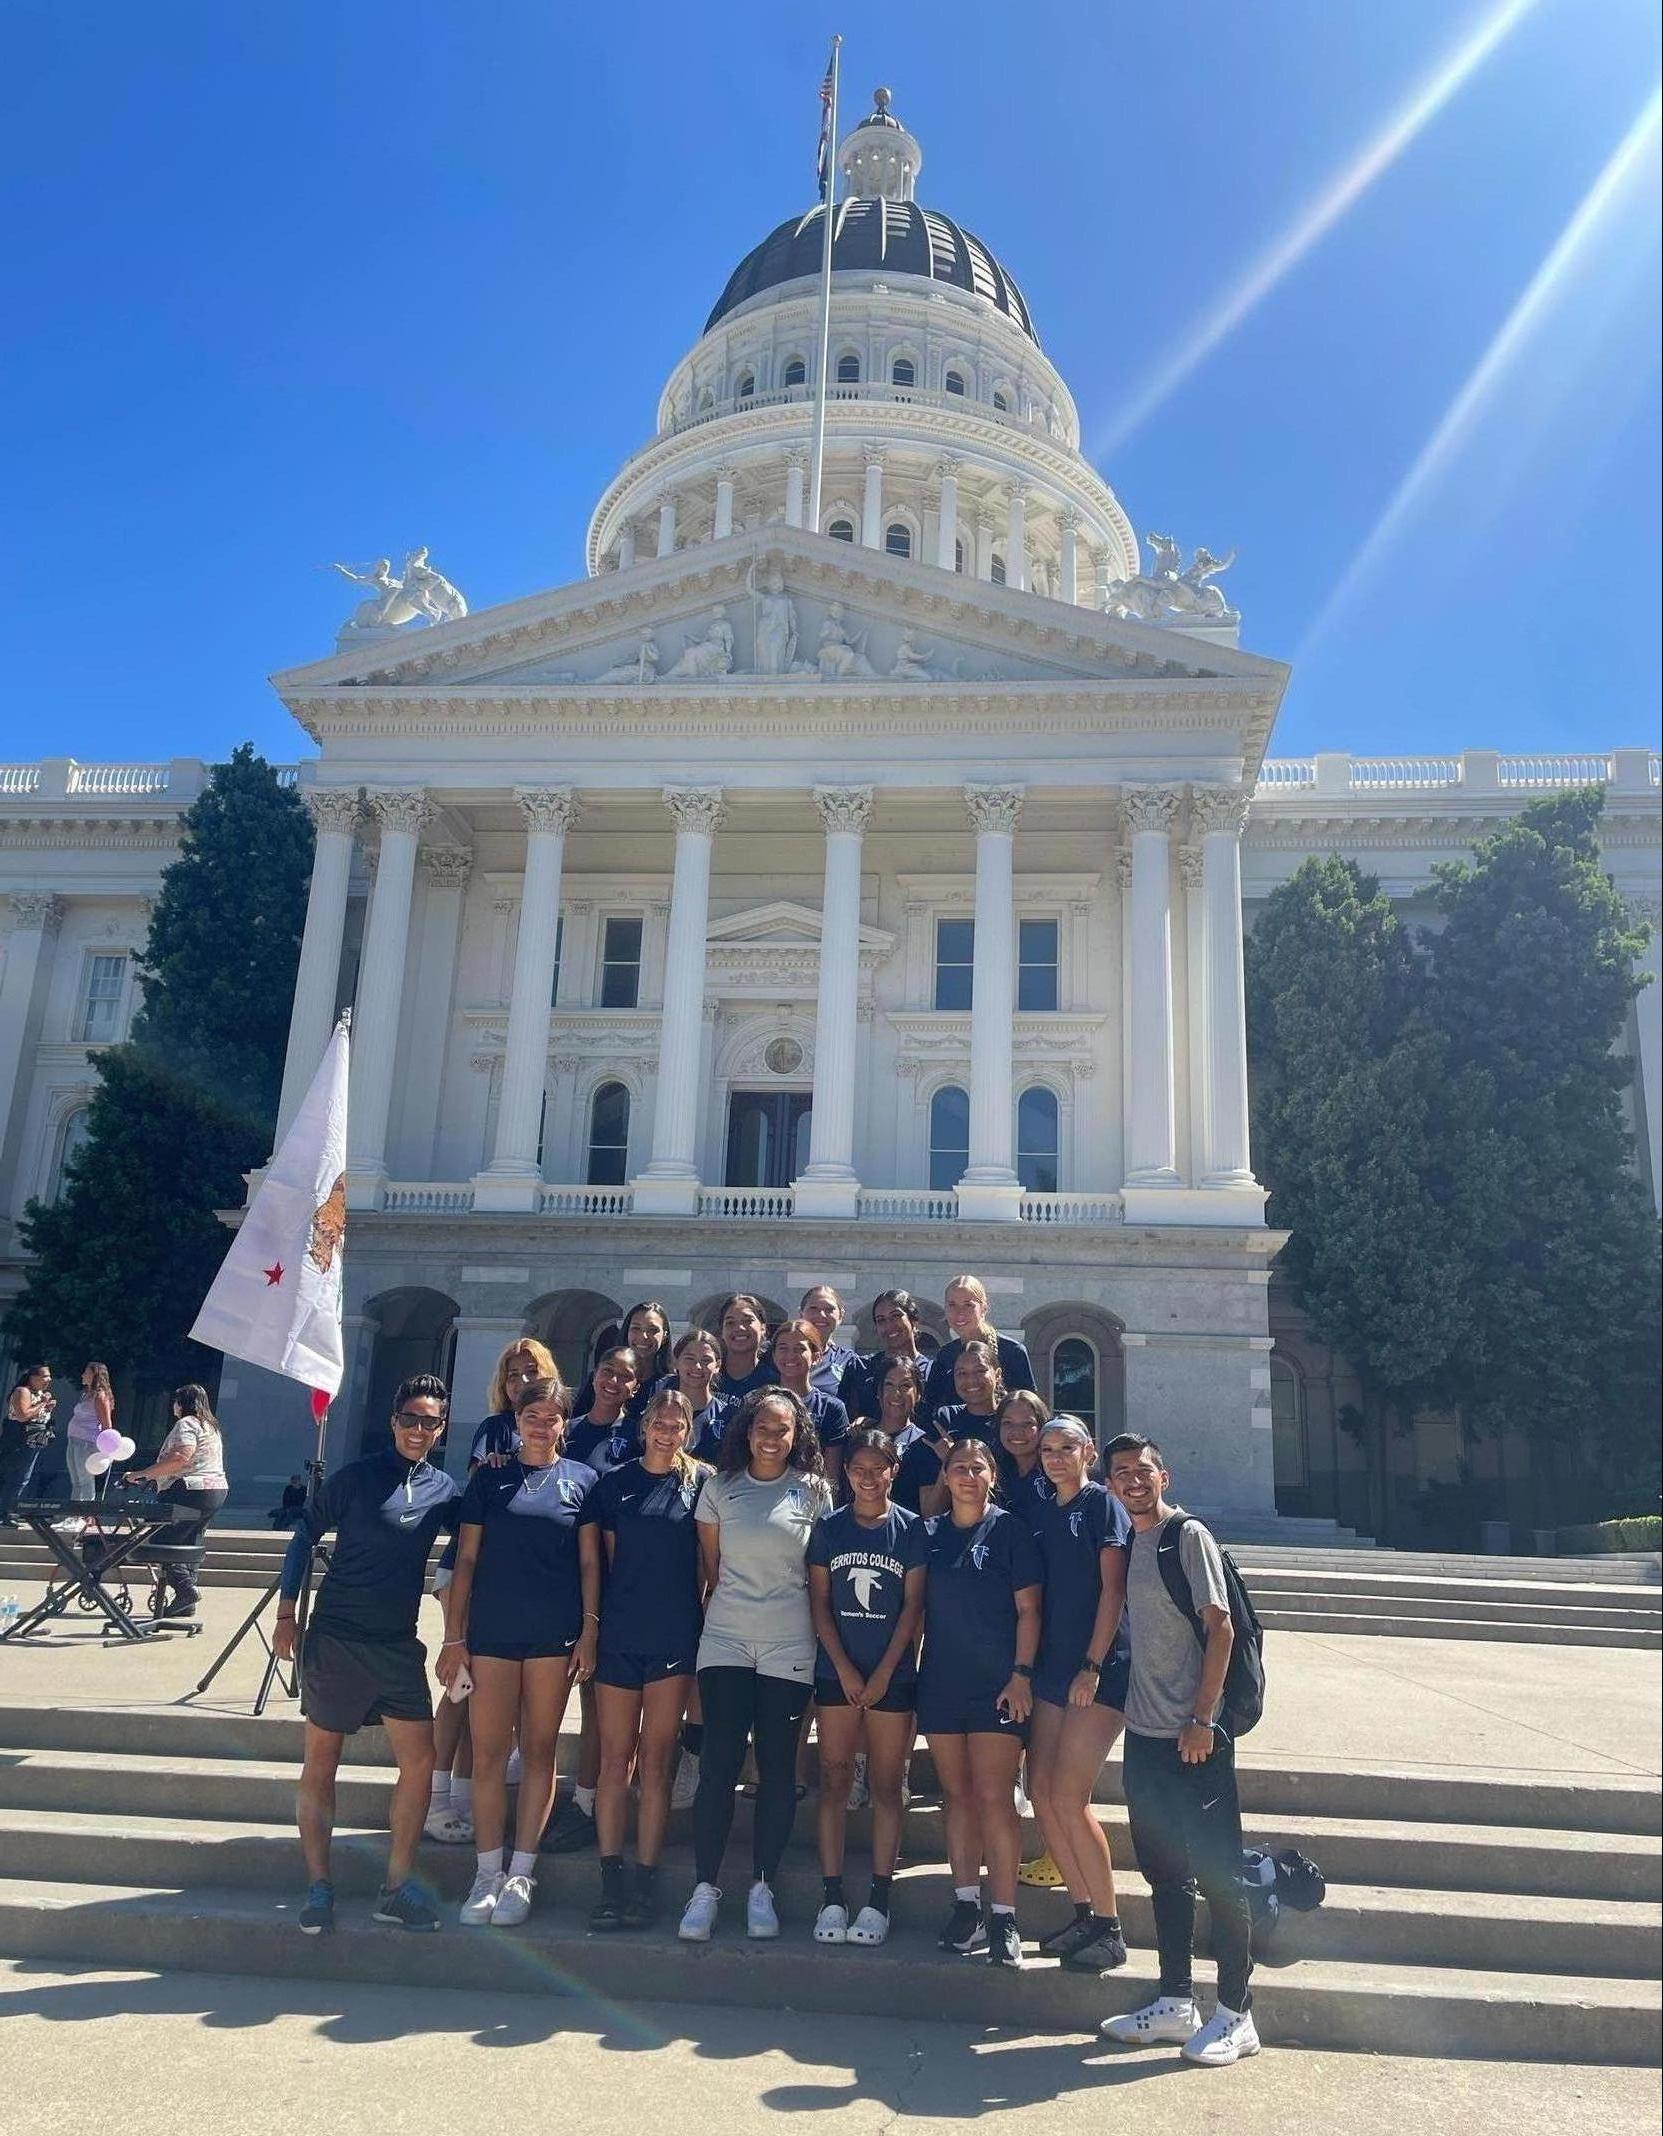 Women's soccer team visited the Capitol Building during their Northern California trip